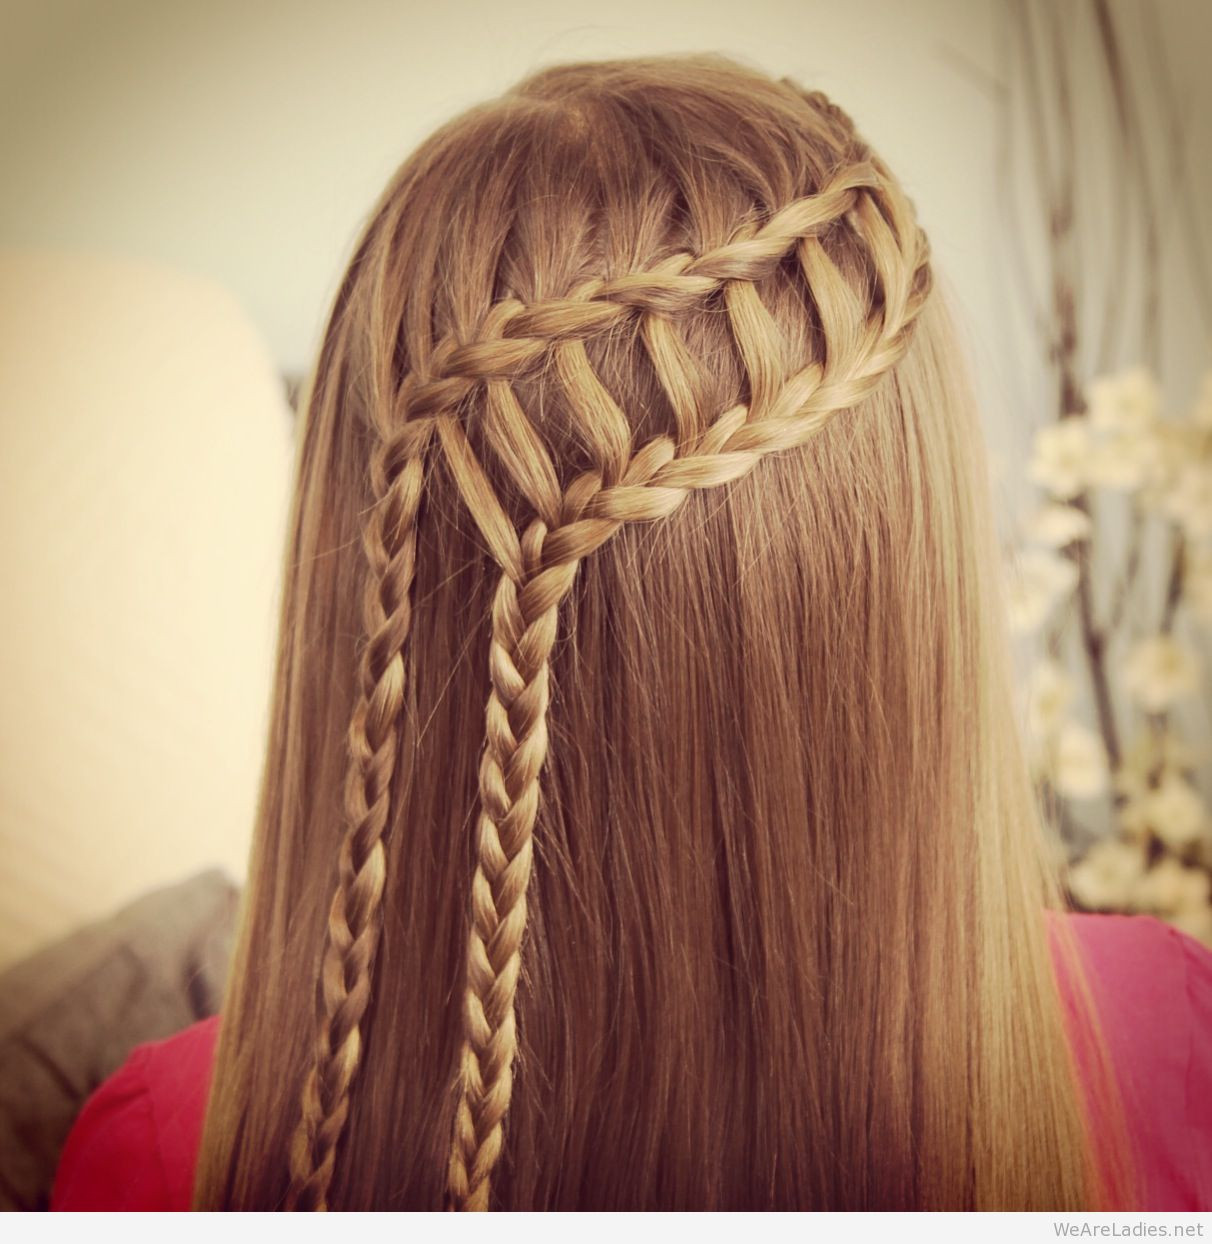 Braids Hairstyles For Girls
 Awesome hairstyles tumblr ideas